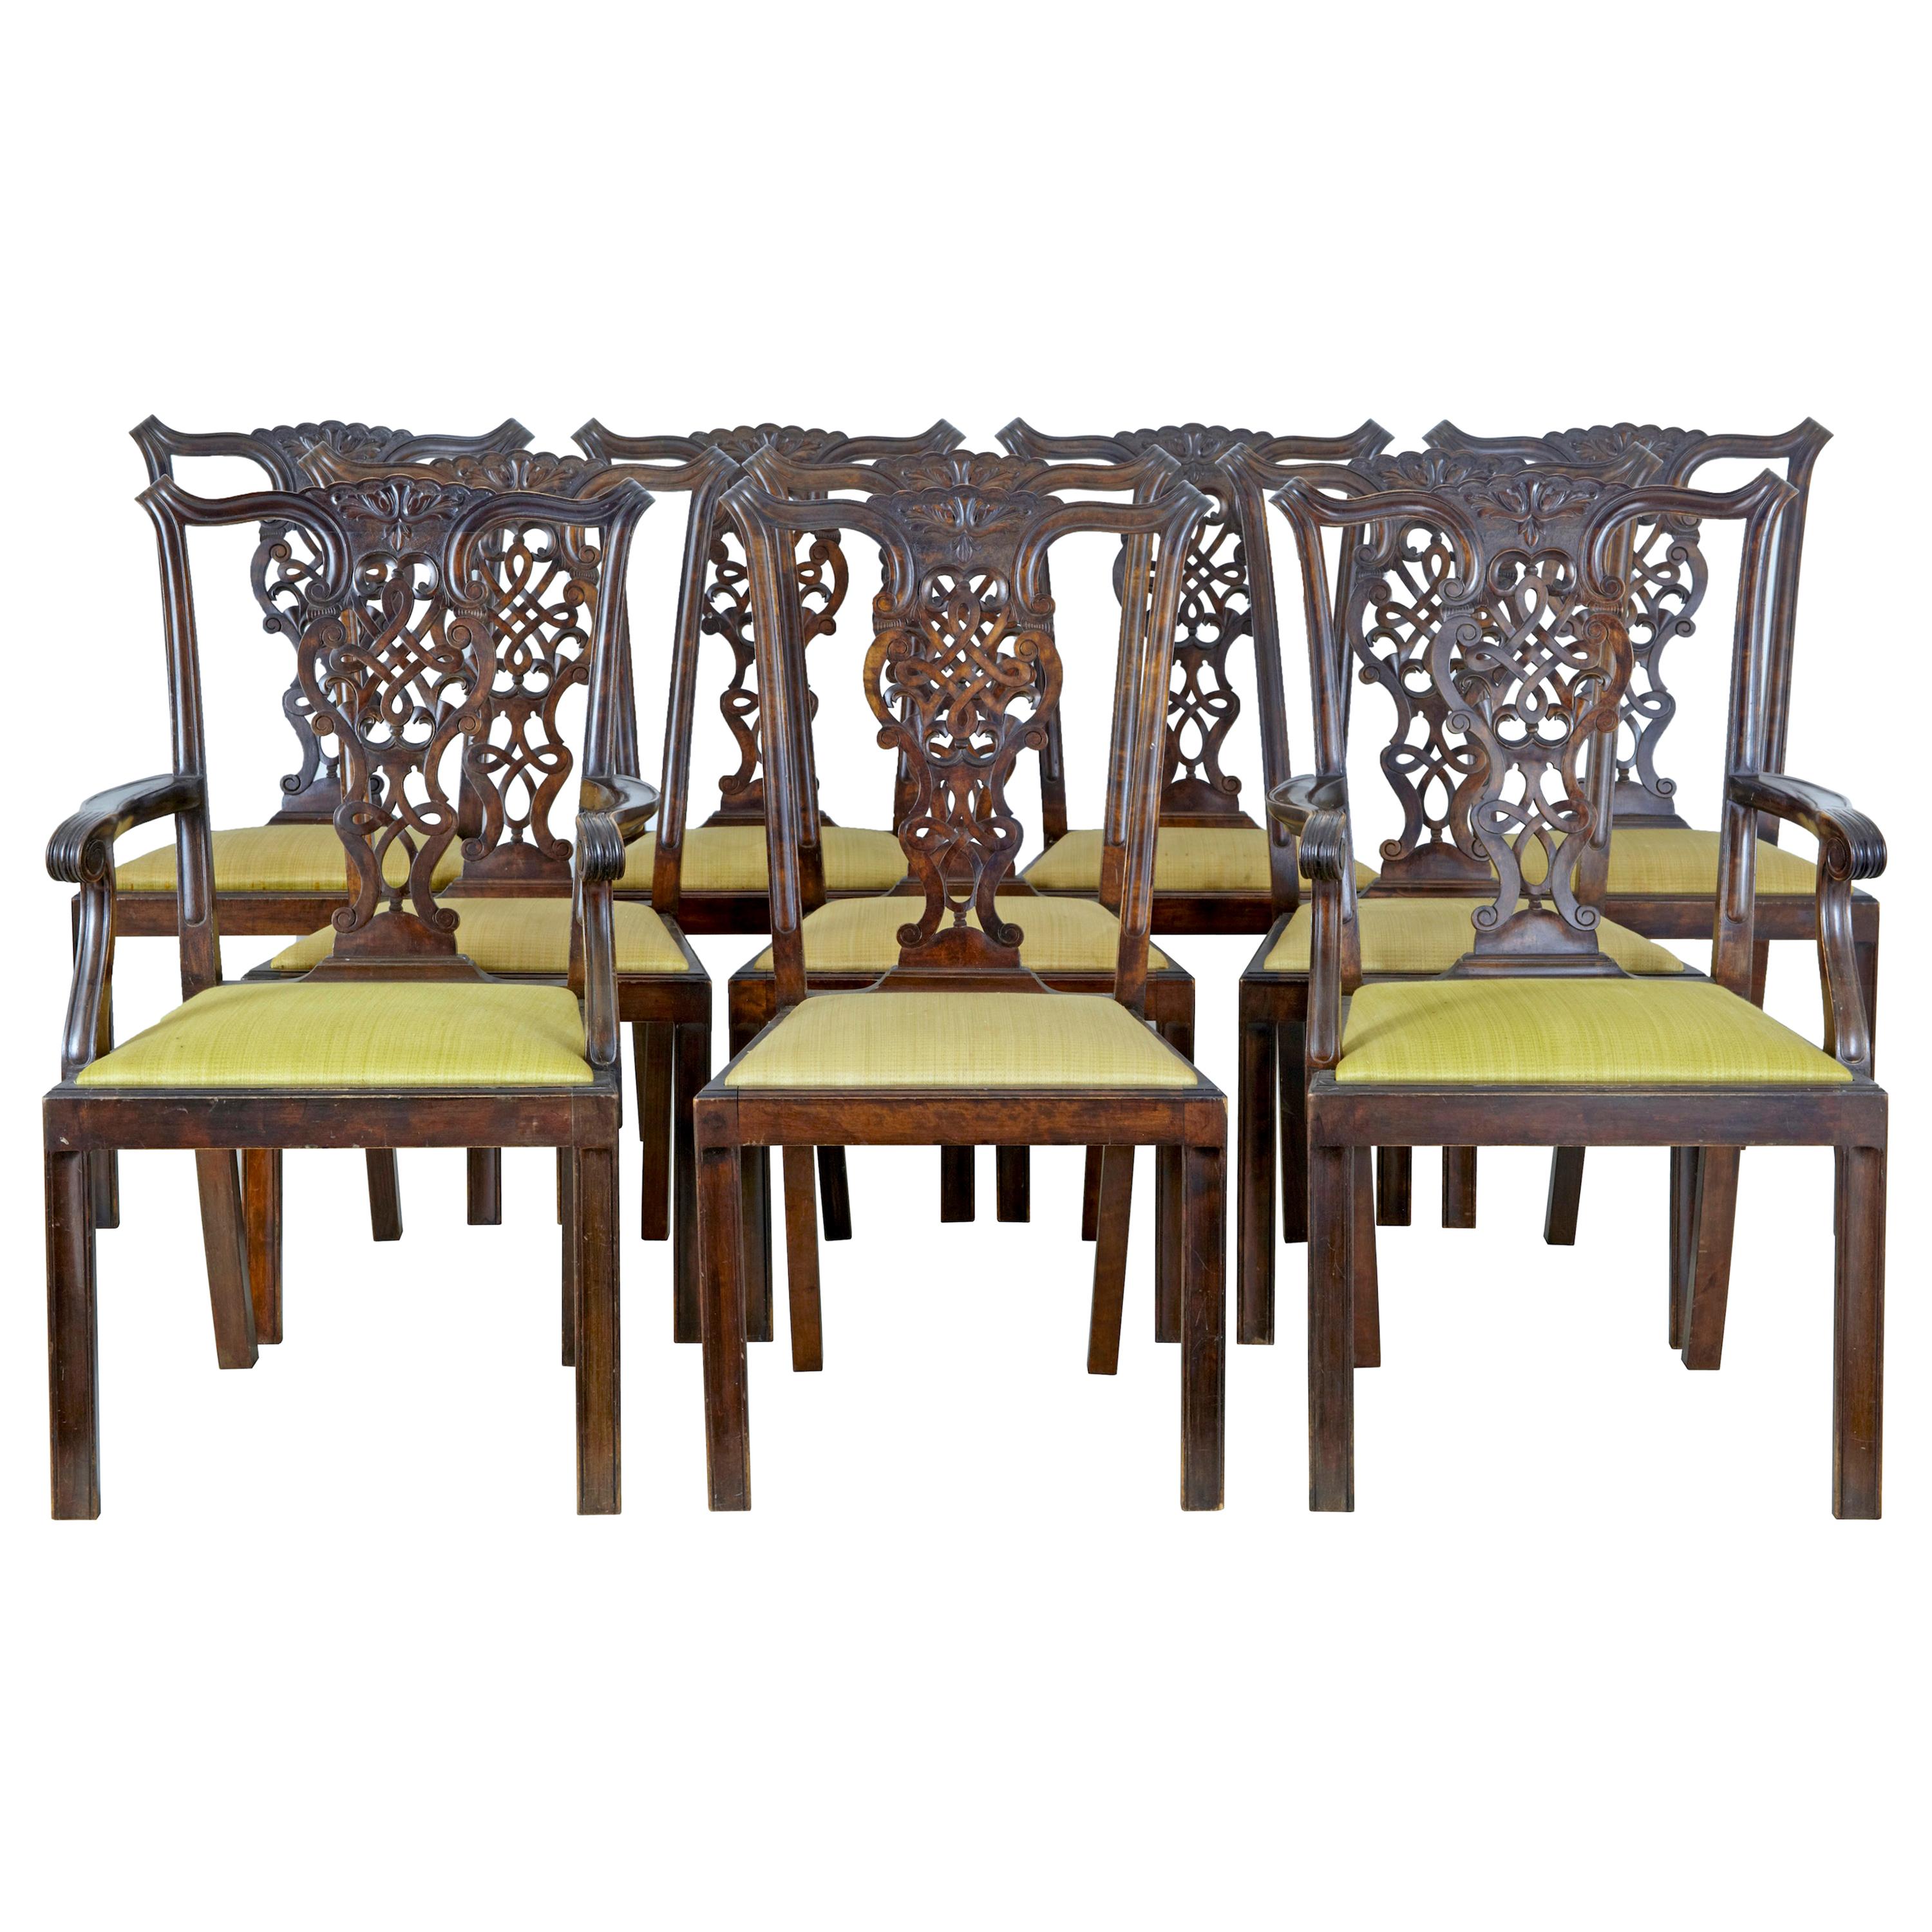 Set of 8+2 19th Century Carved Birch Chippendale Design Dining Chairs